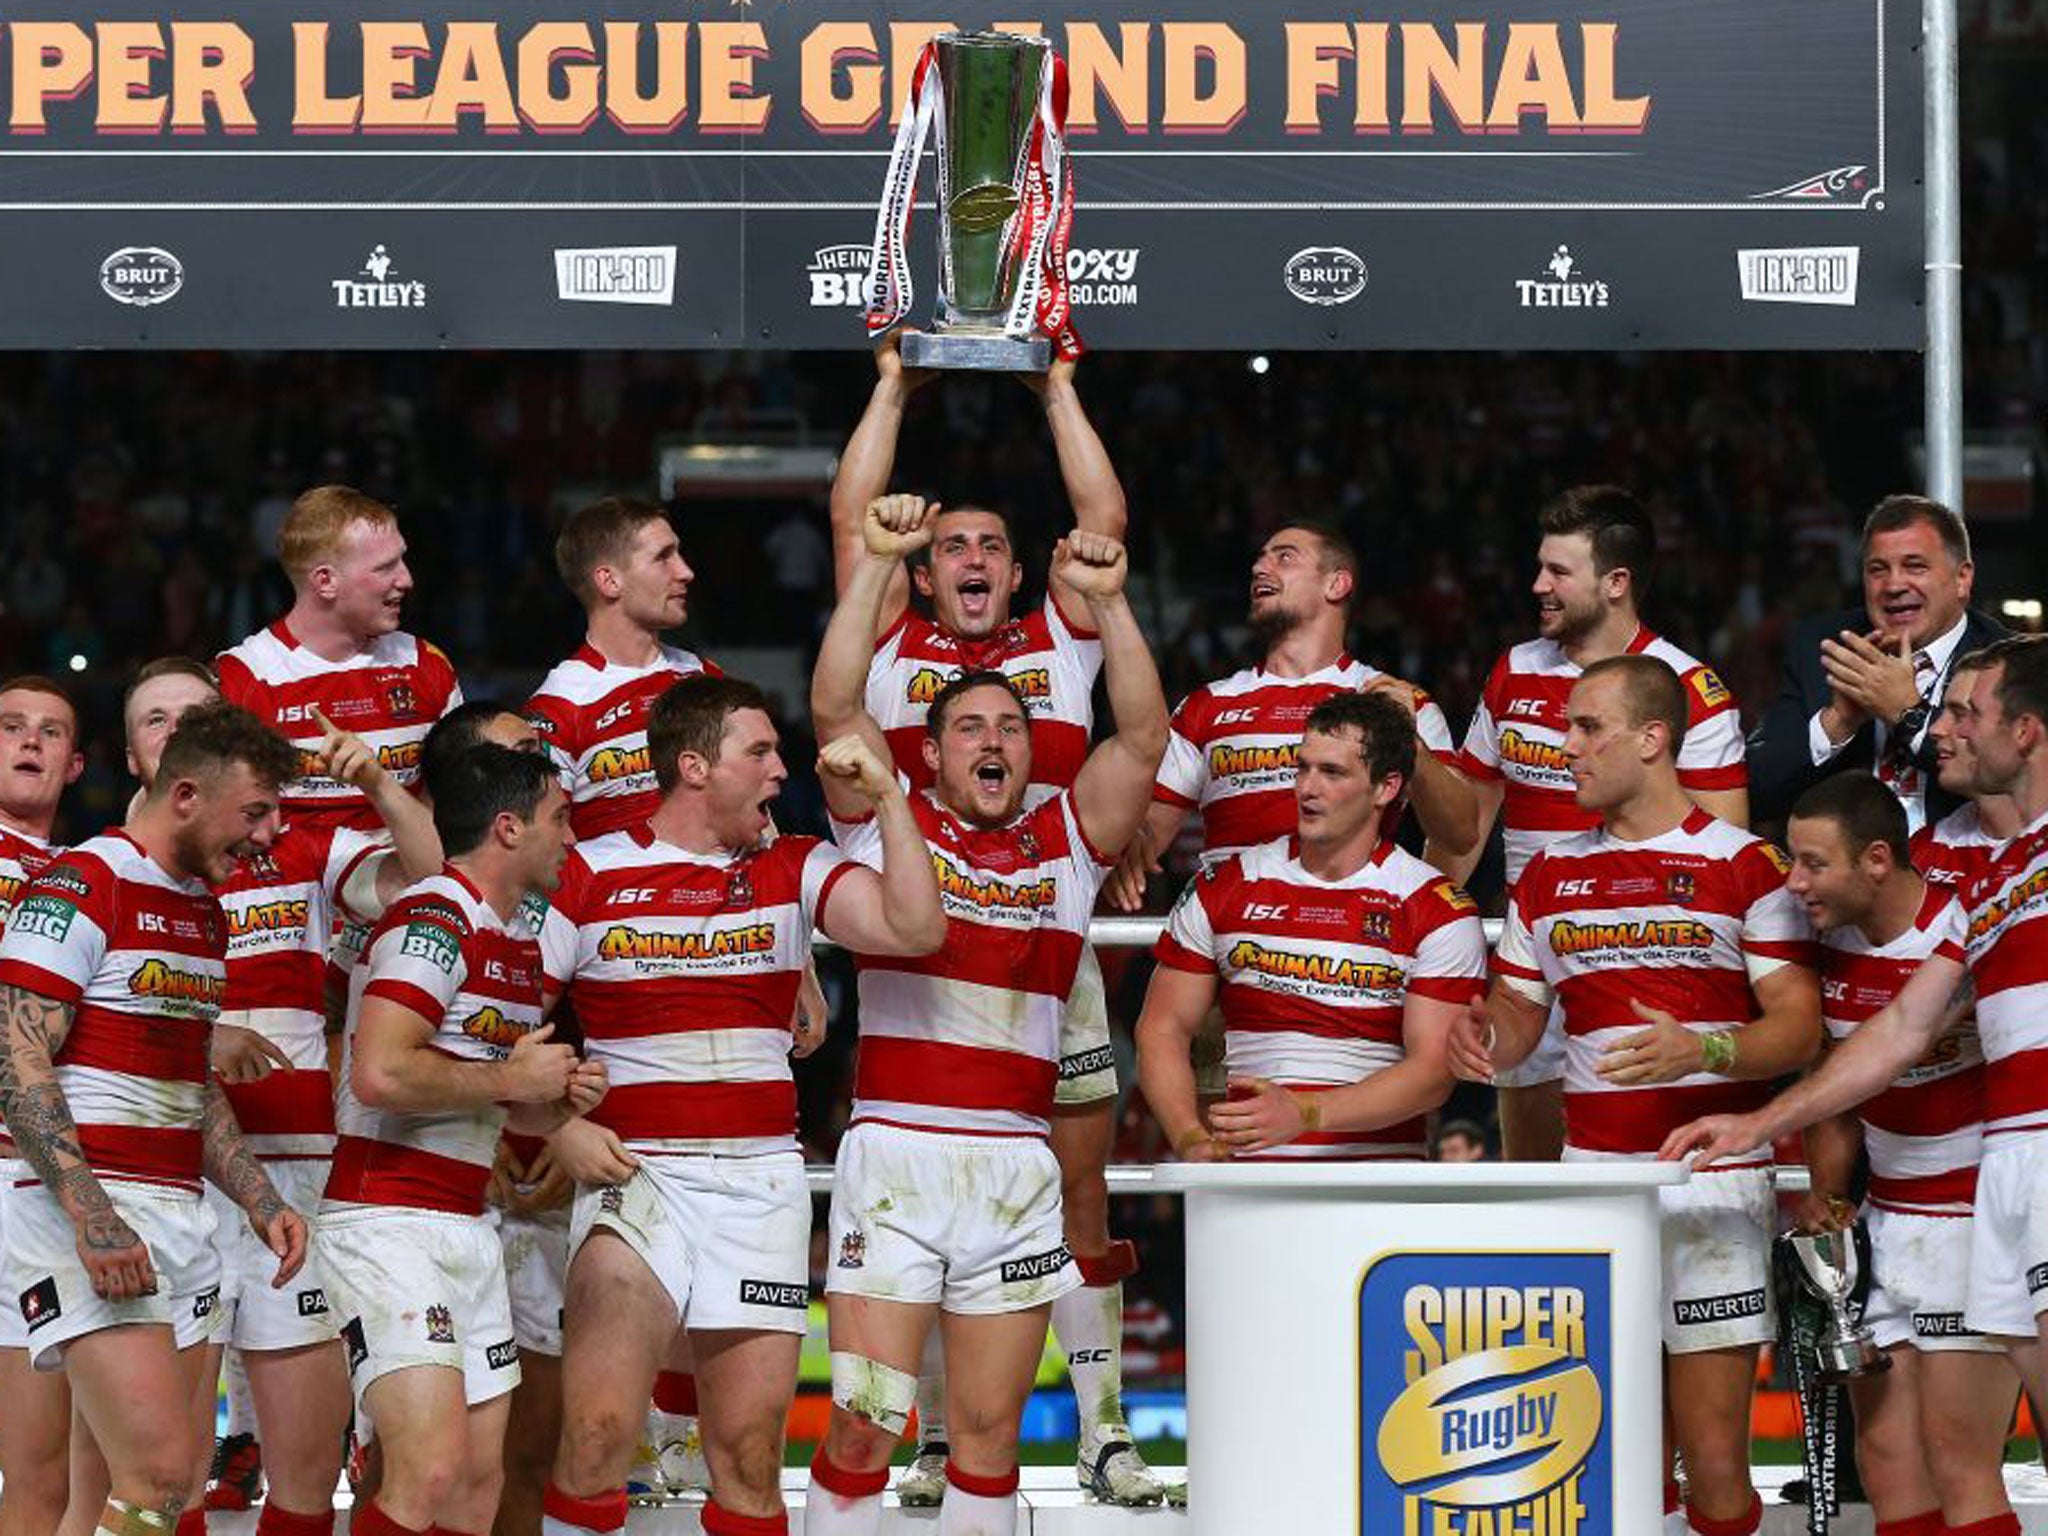 Wigan celebrate with the trophy after their Grand Final victory